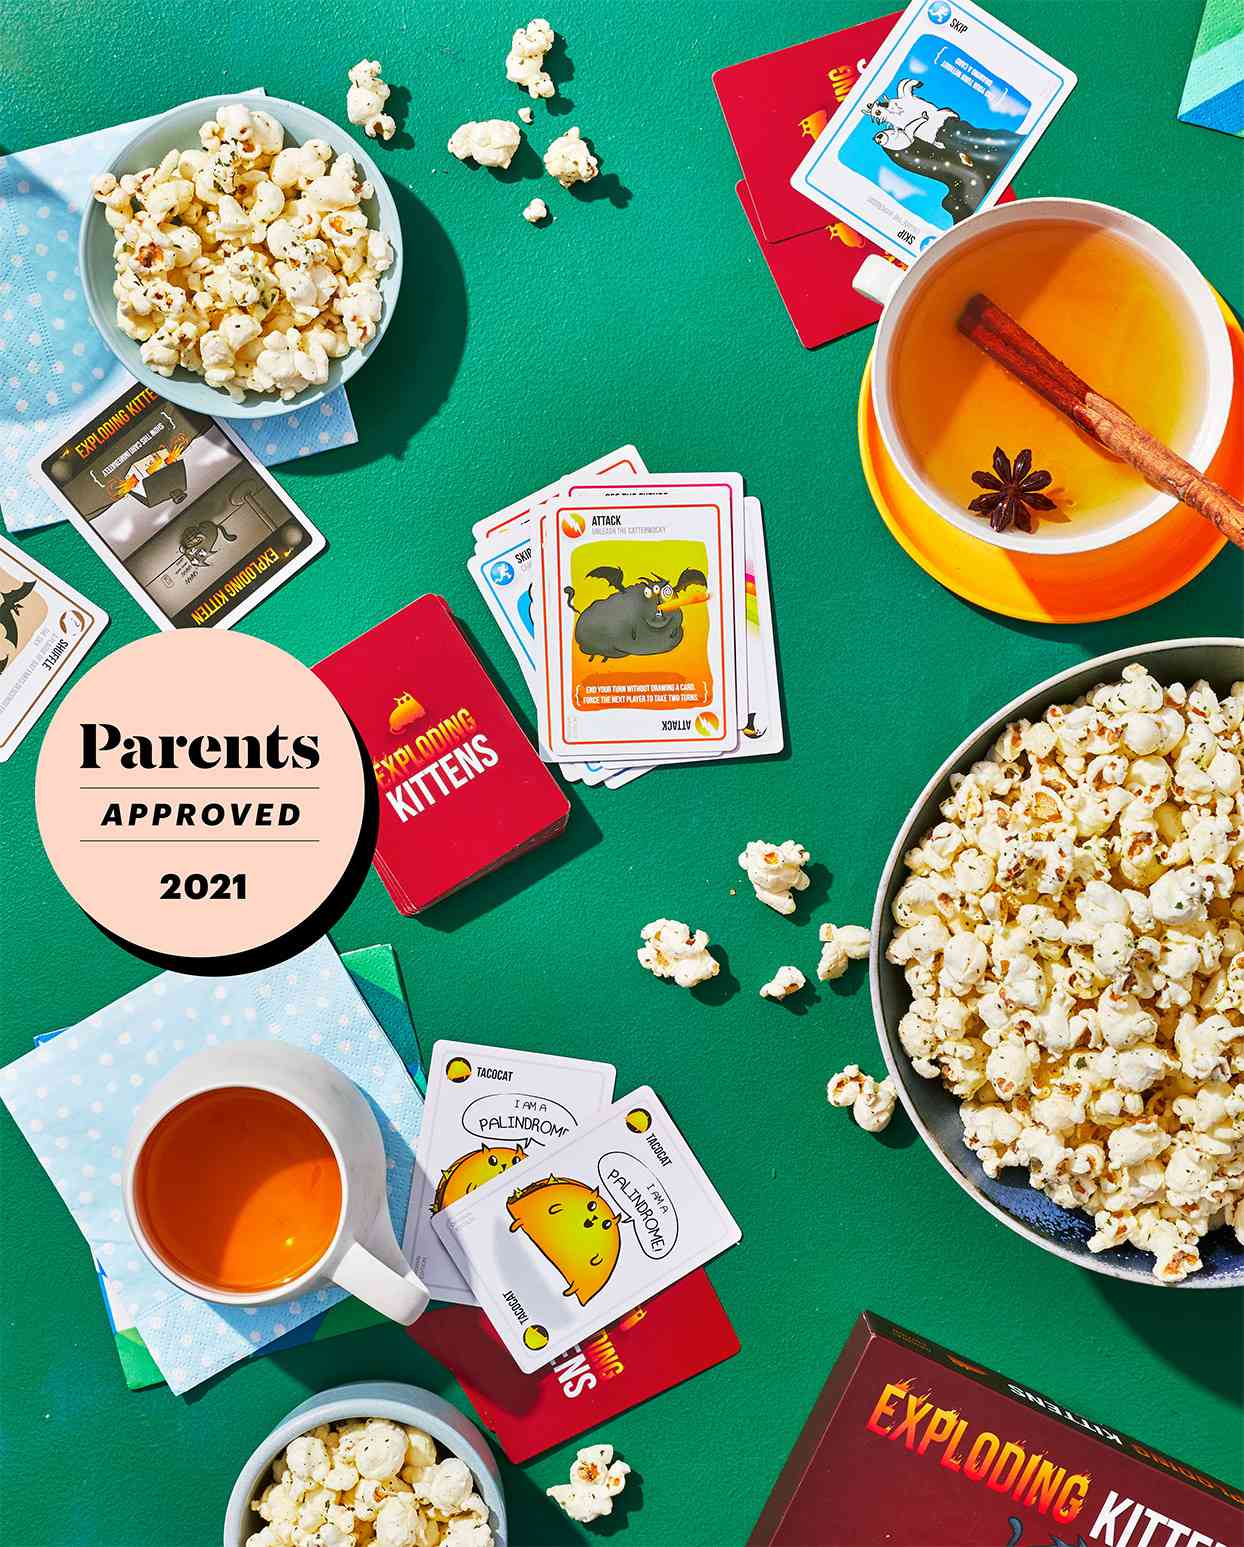 card games and popcorn on green table